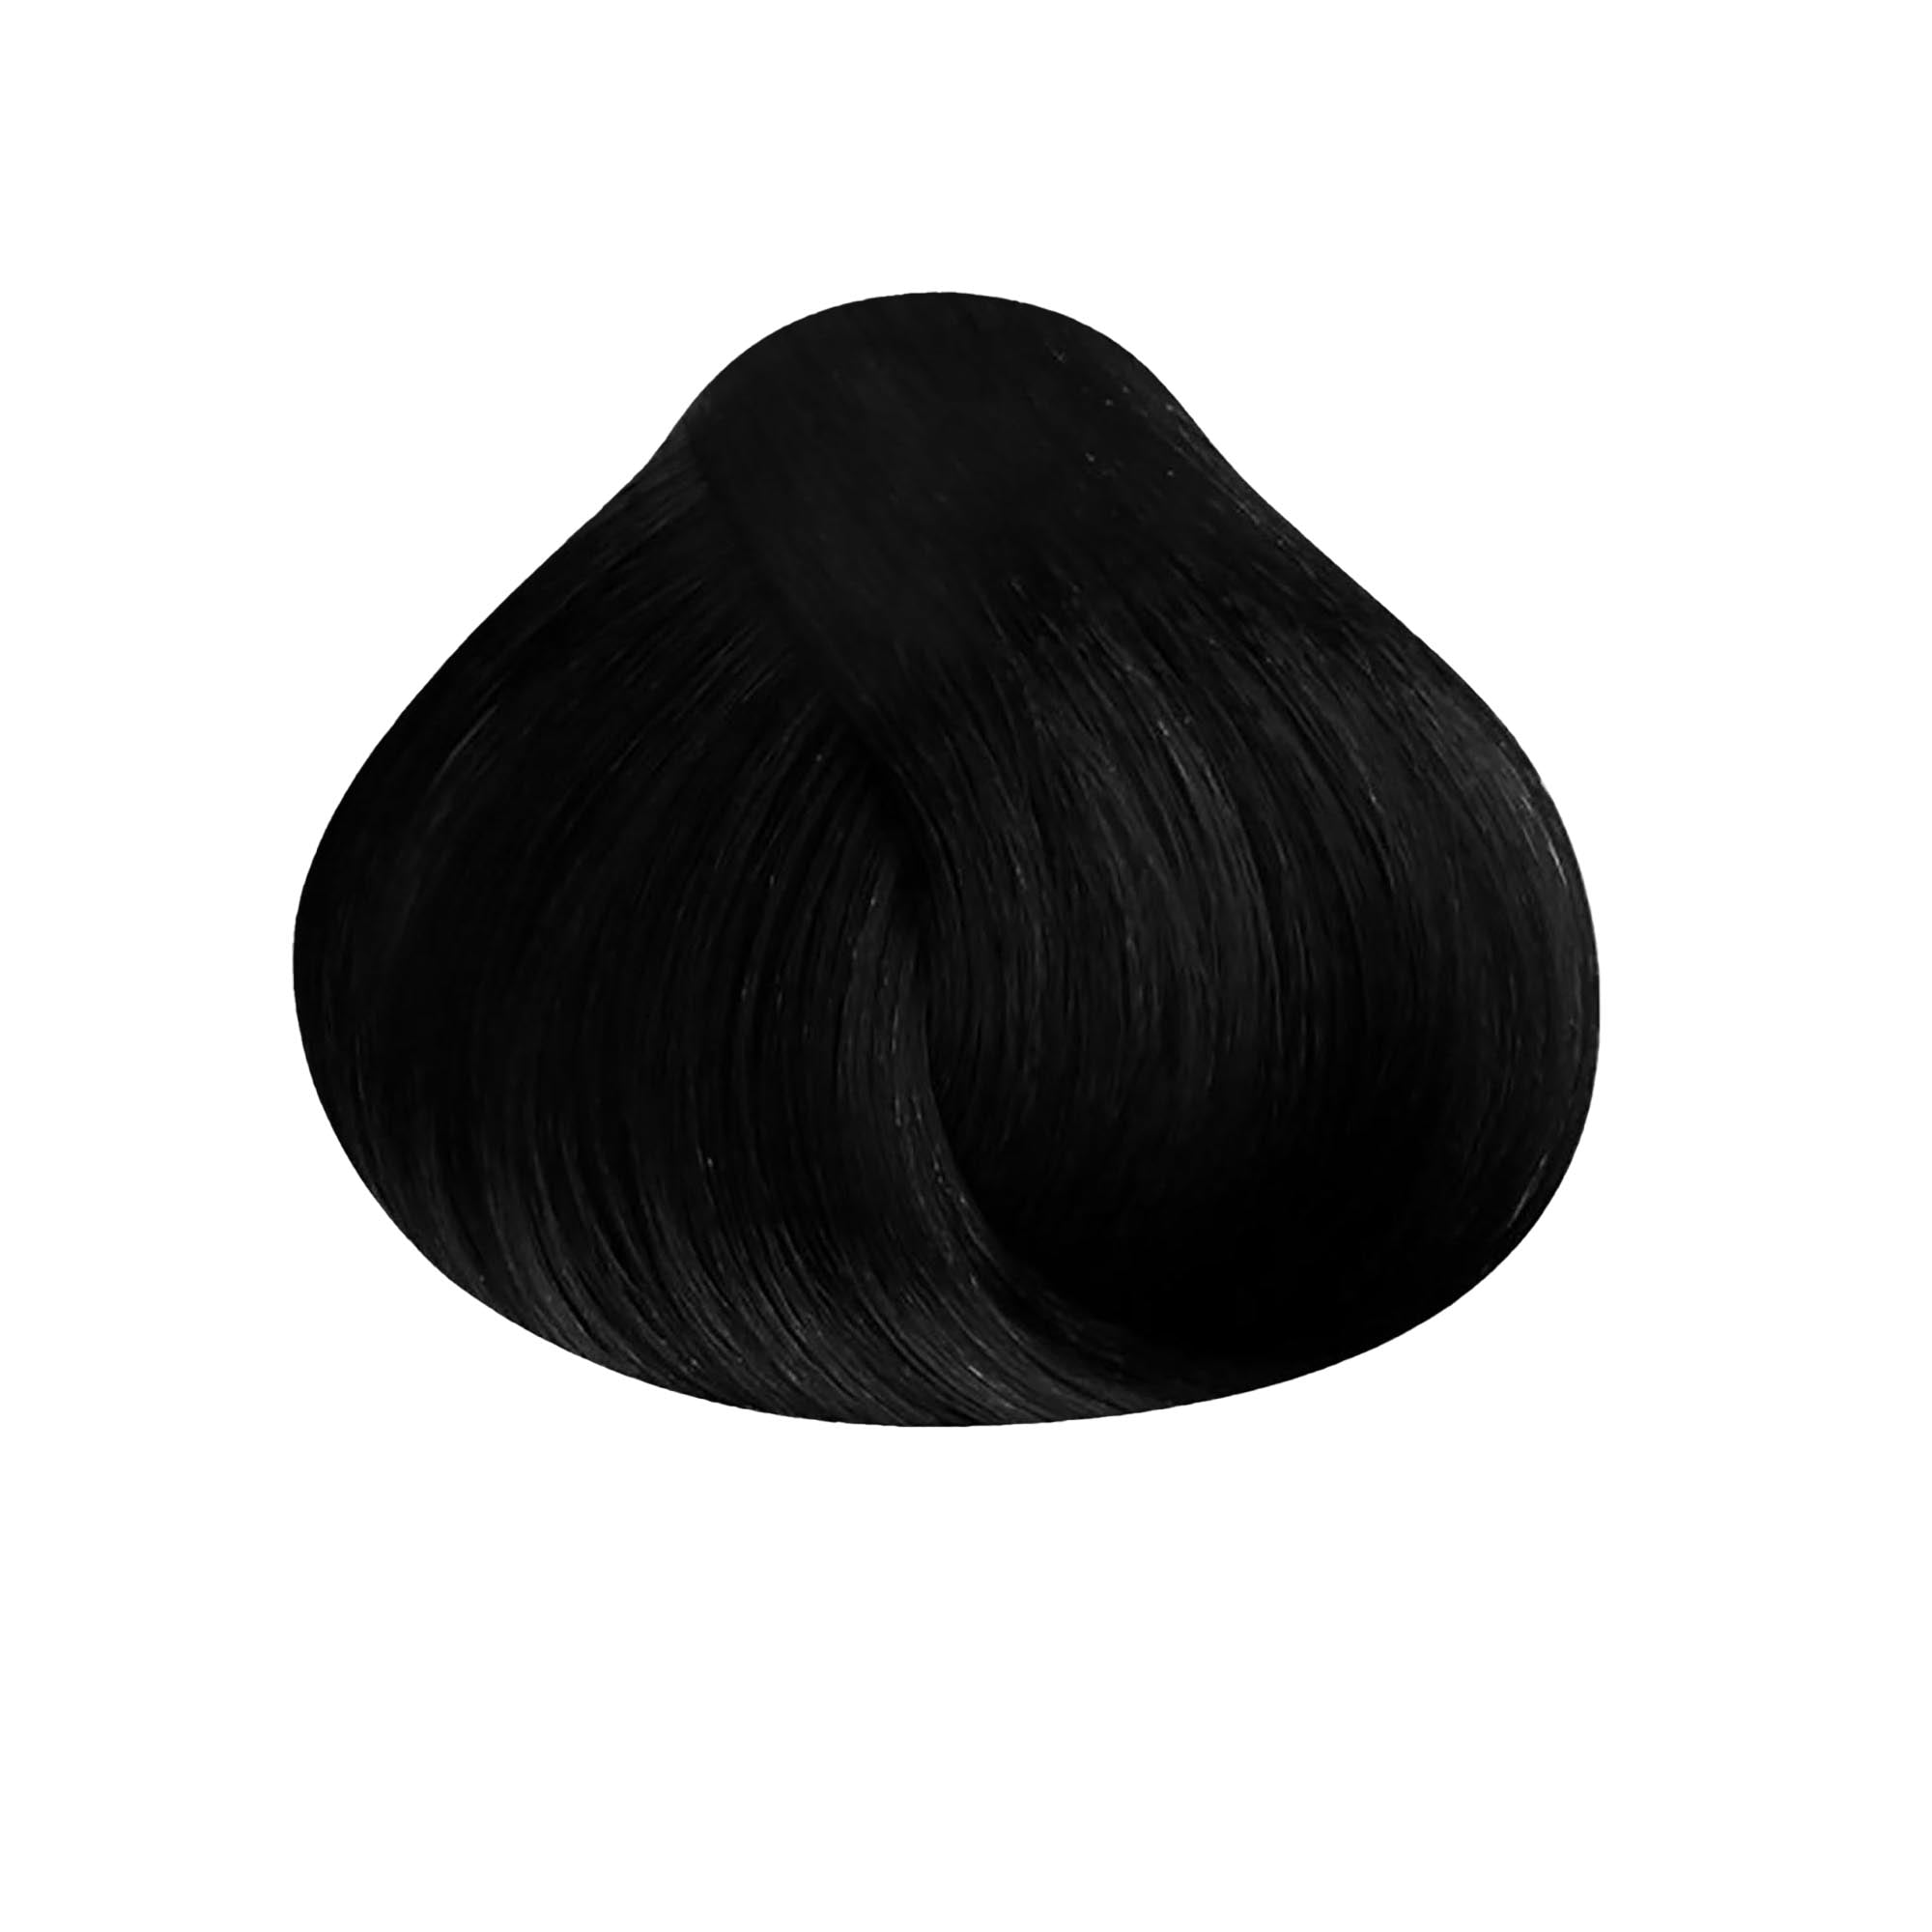 Satin Professional Hair Color / 1N Black / Swatch